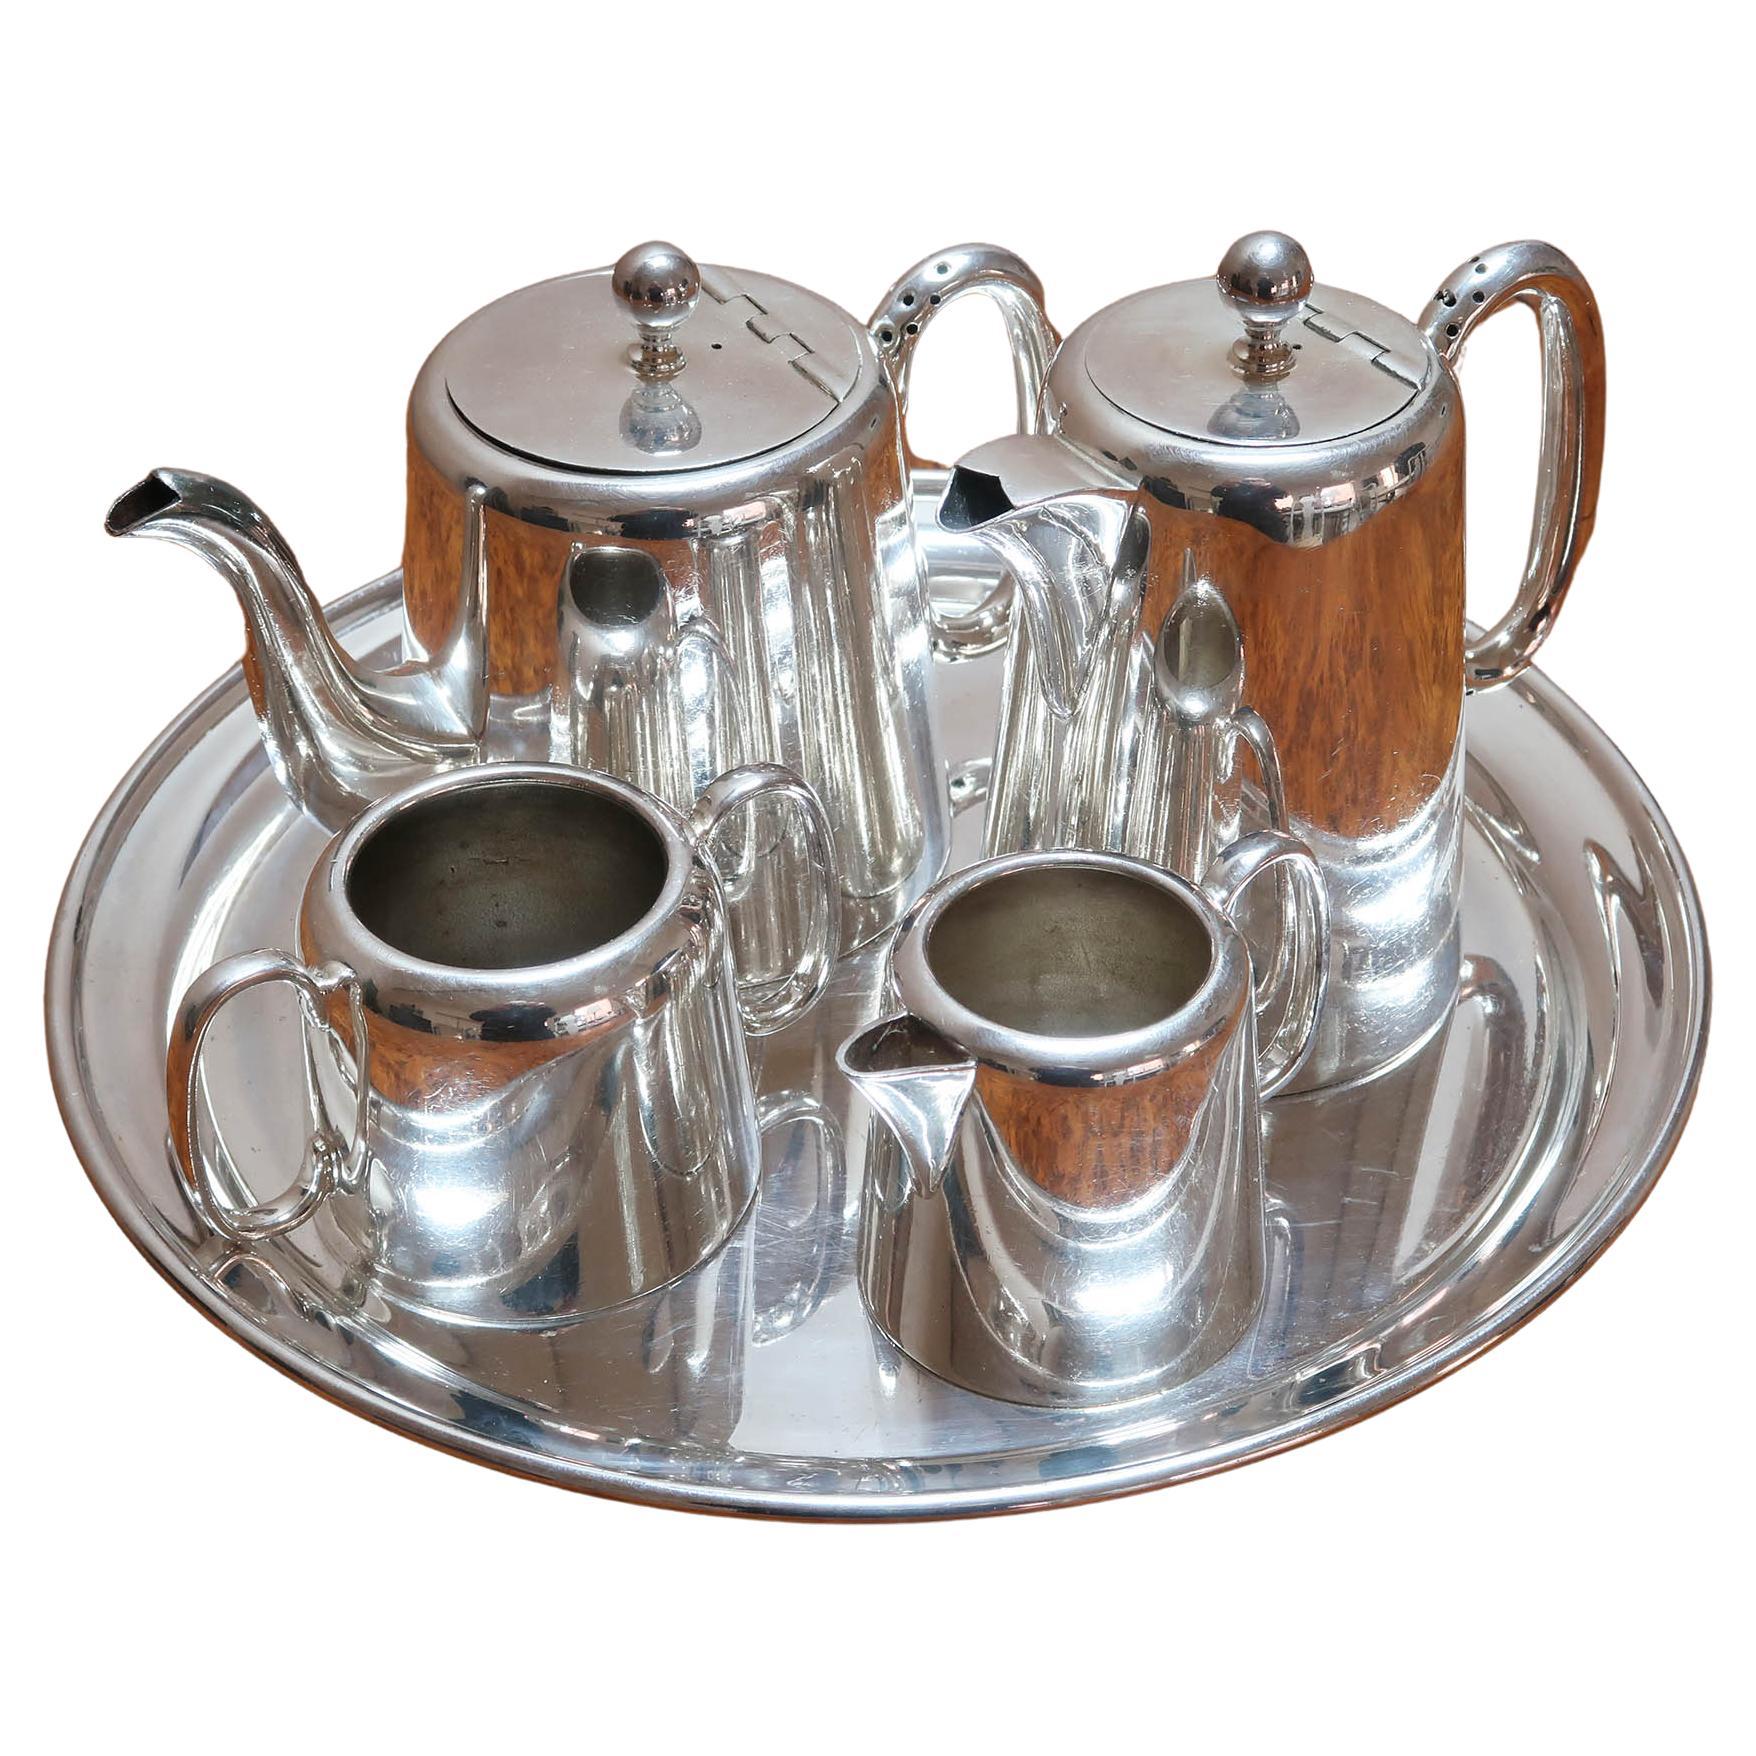 Vintage Silver Plated Tea Set On Tray, English C.1920 For Sale